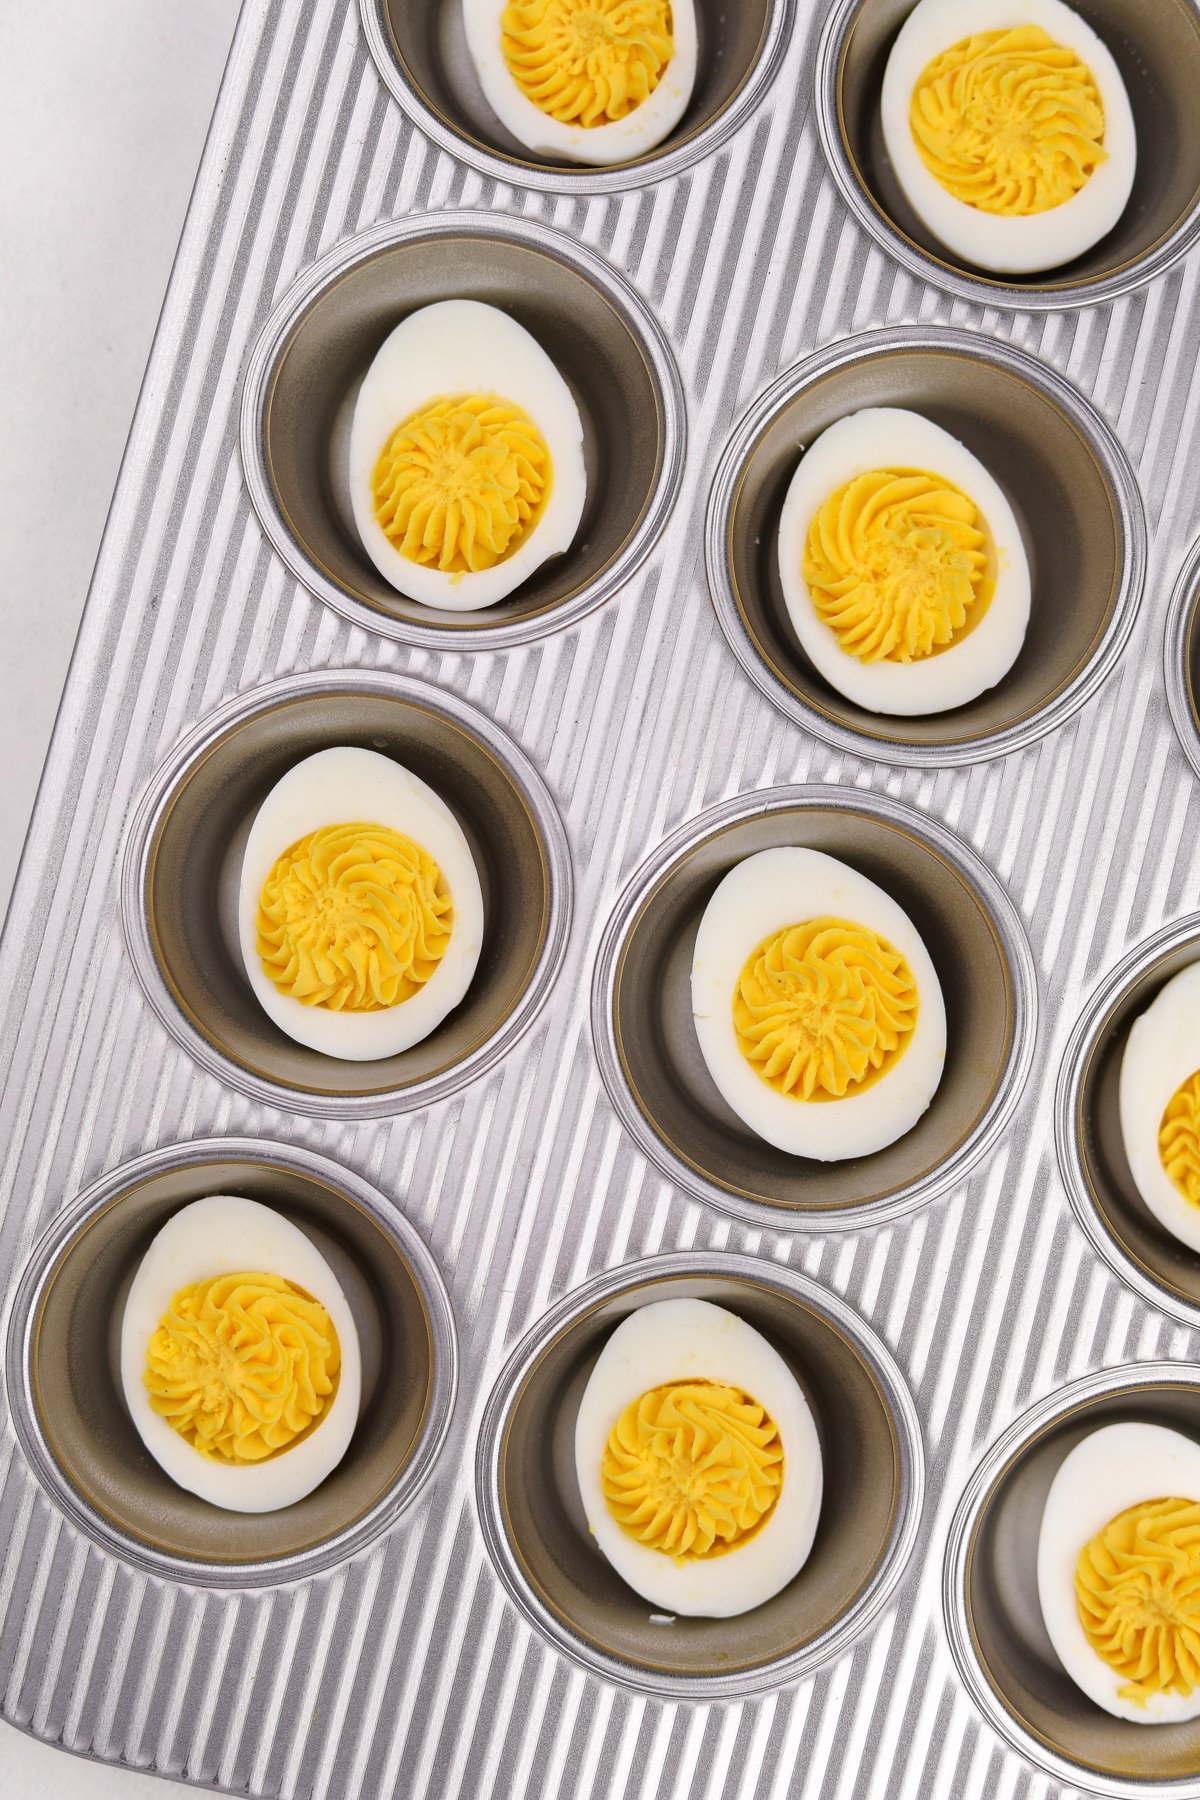 A muffin pan with a deviled egg in each well.